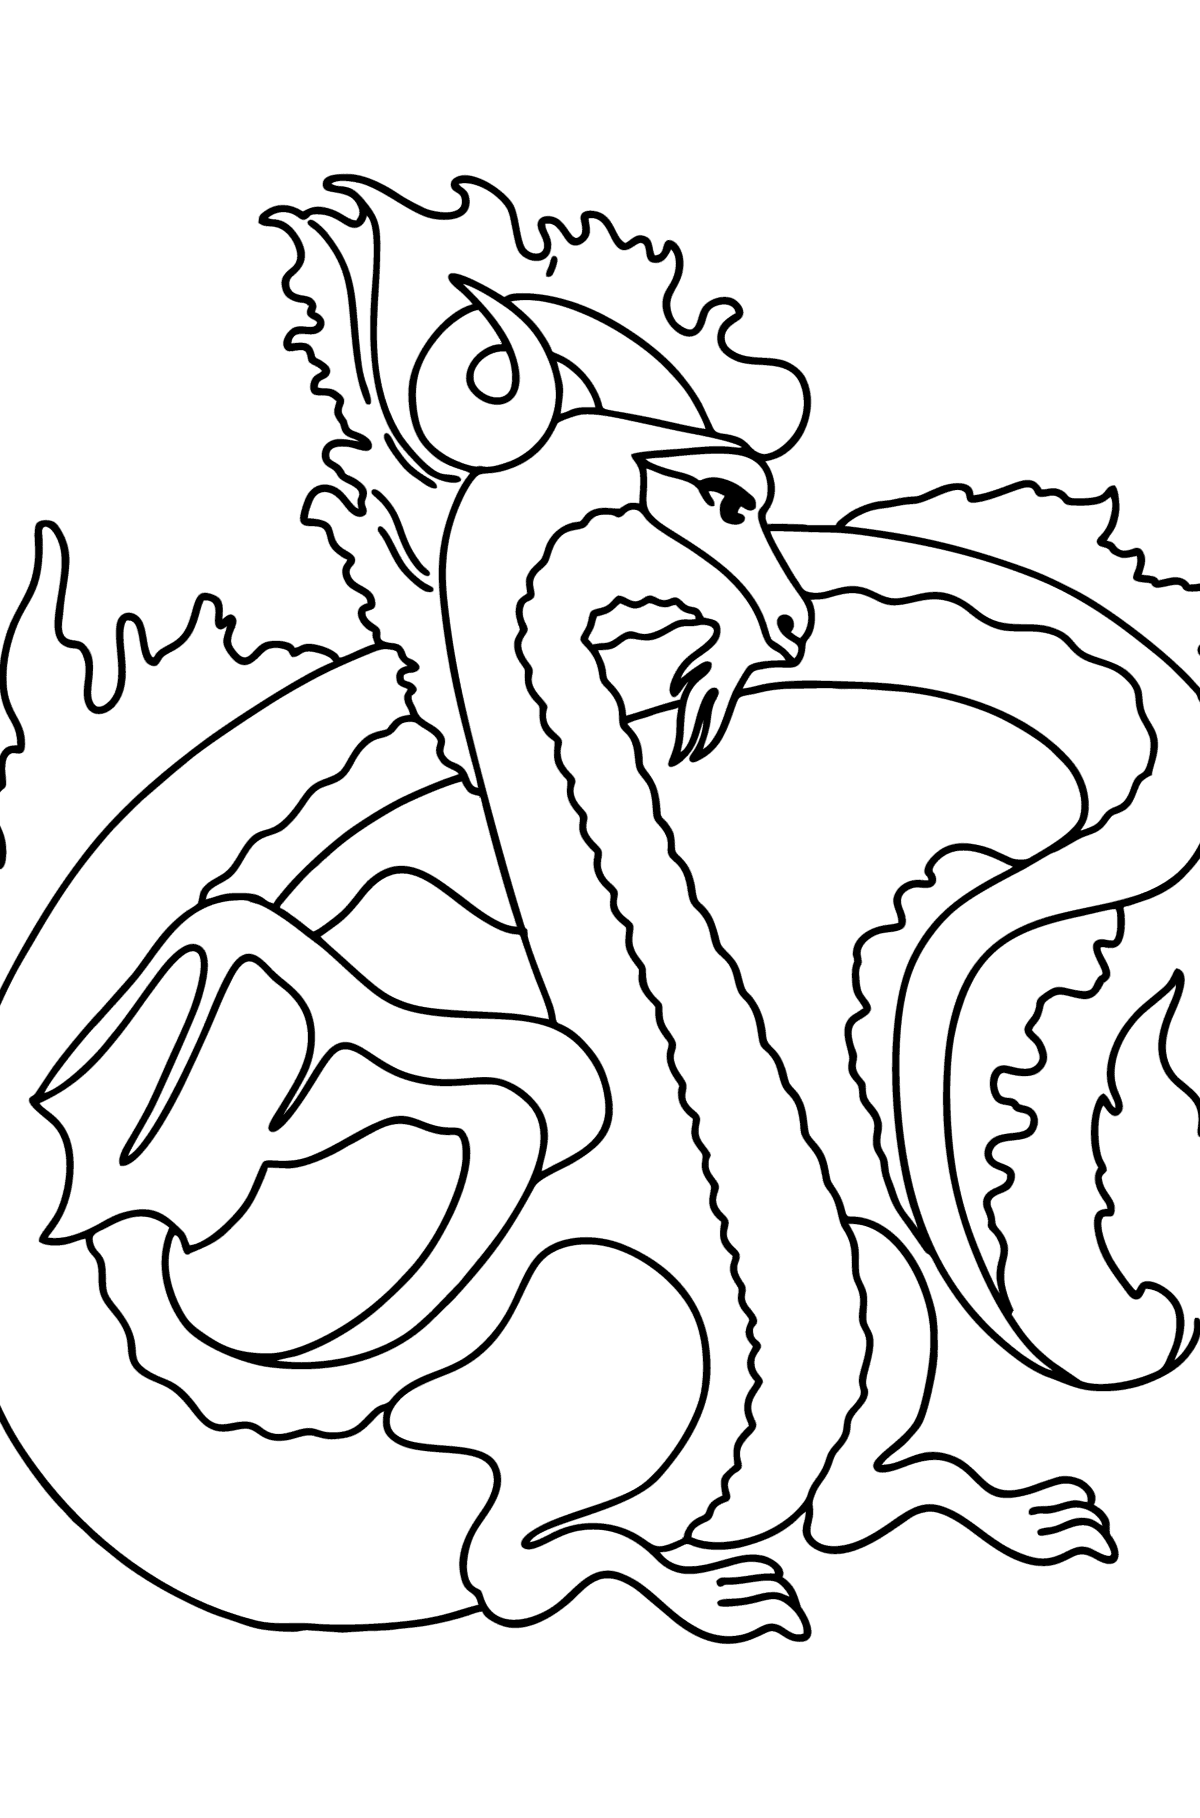 Mythical Dragon coloring page - Coloring Pages for Kids